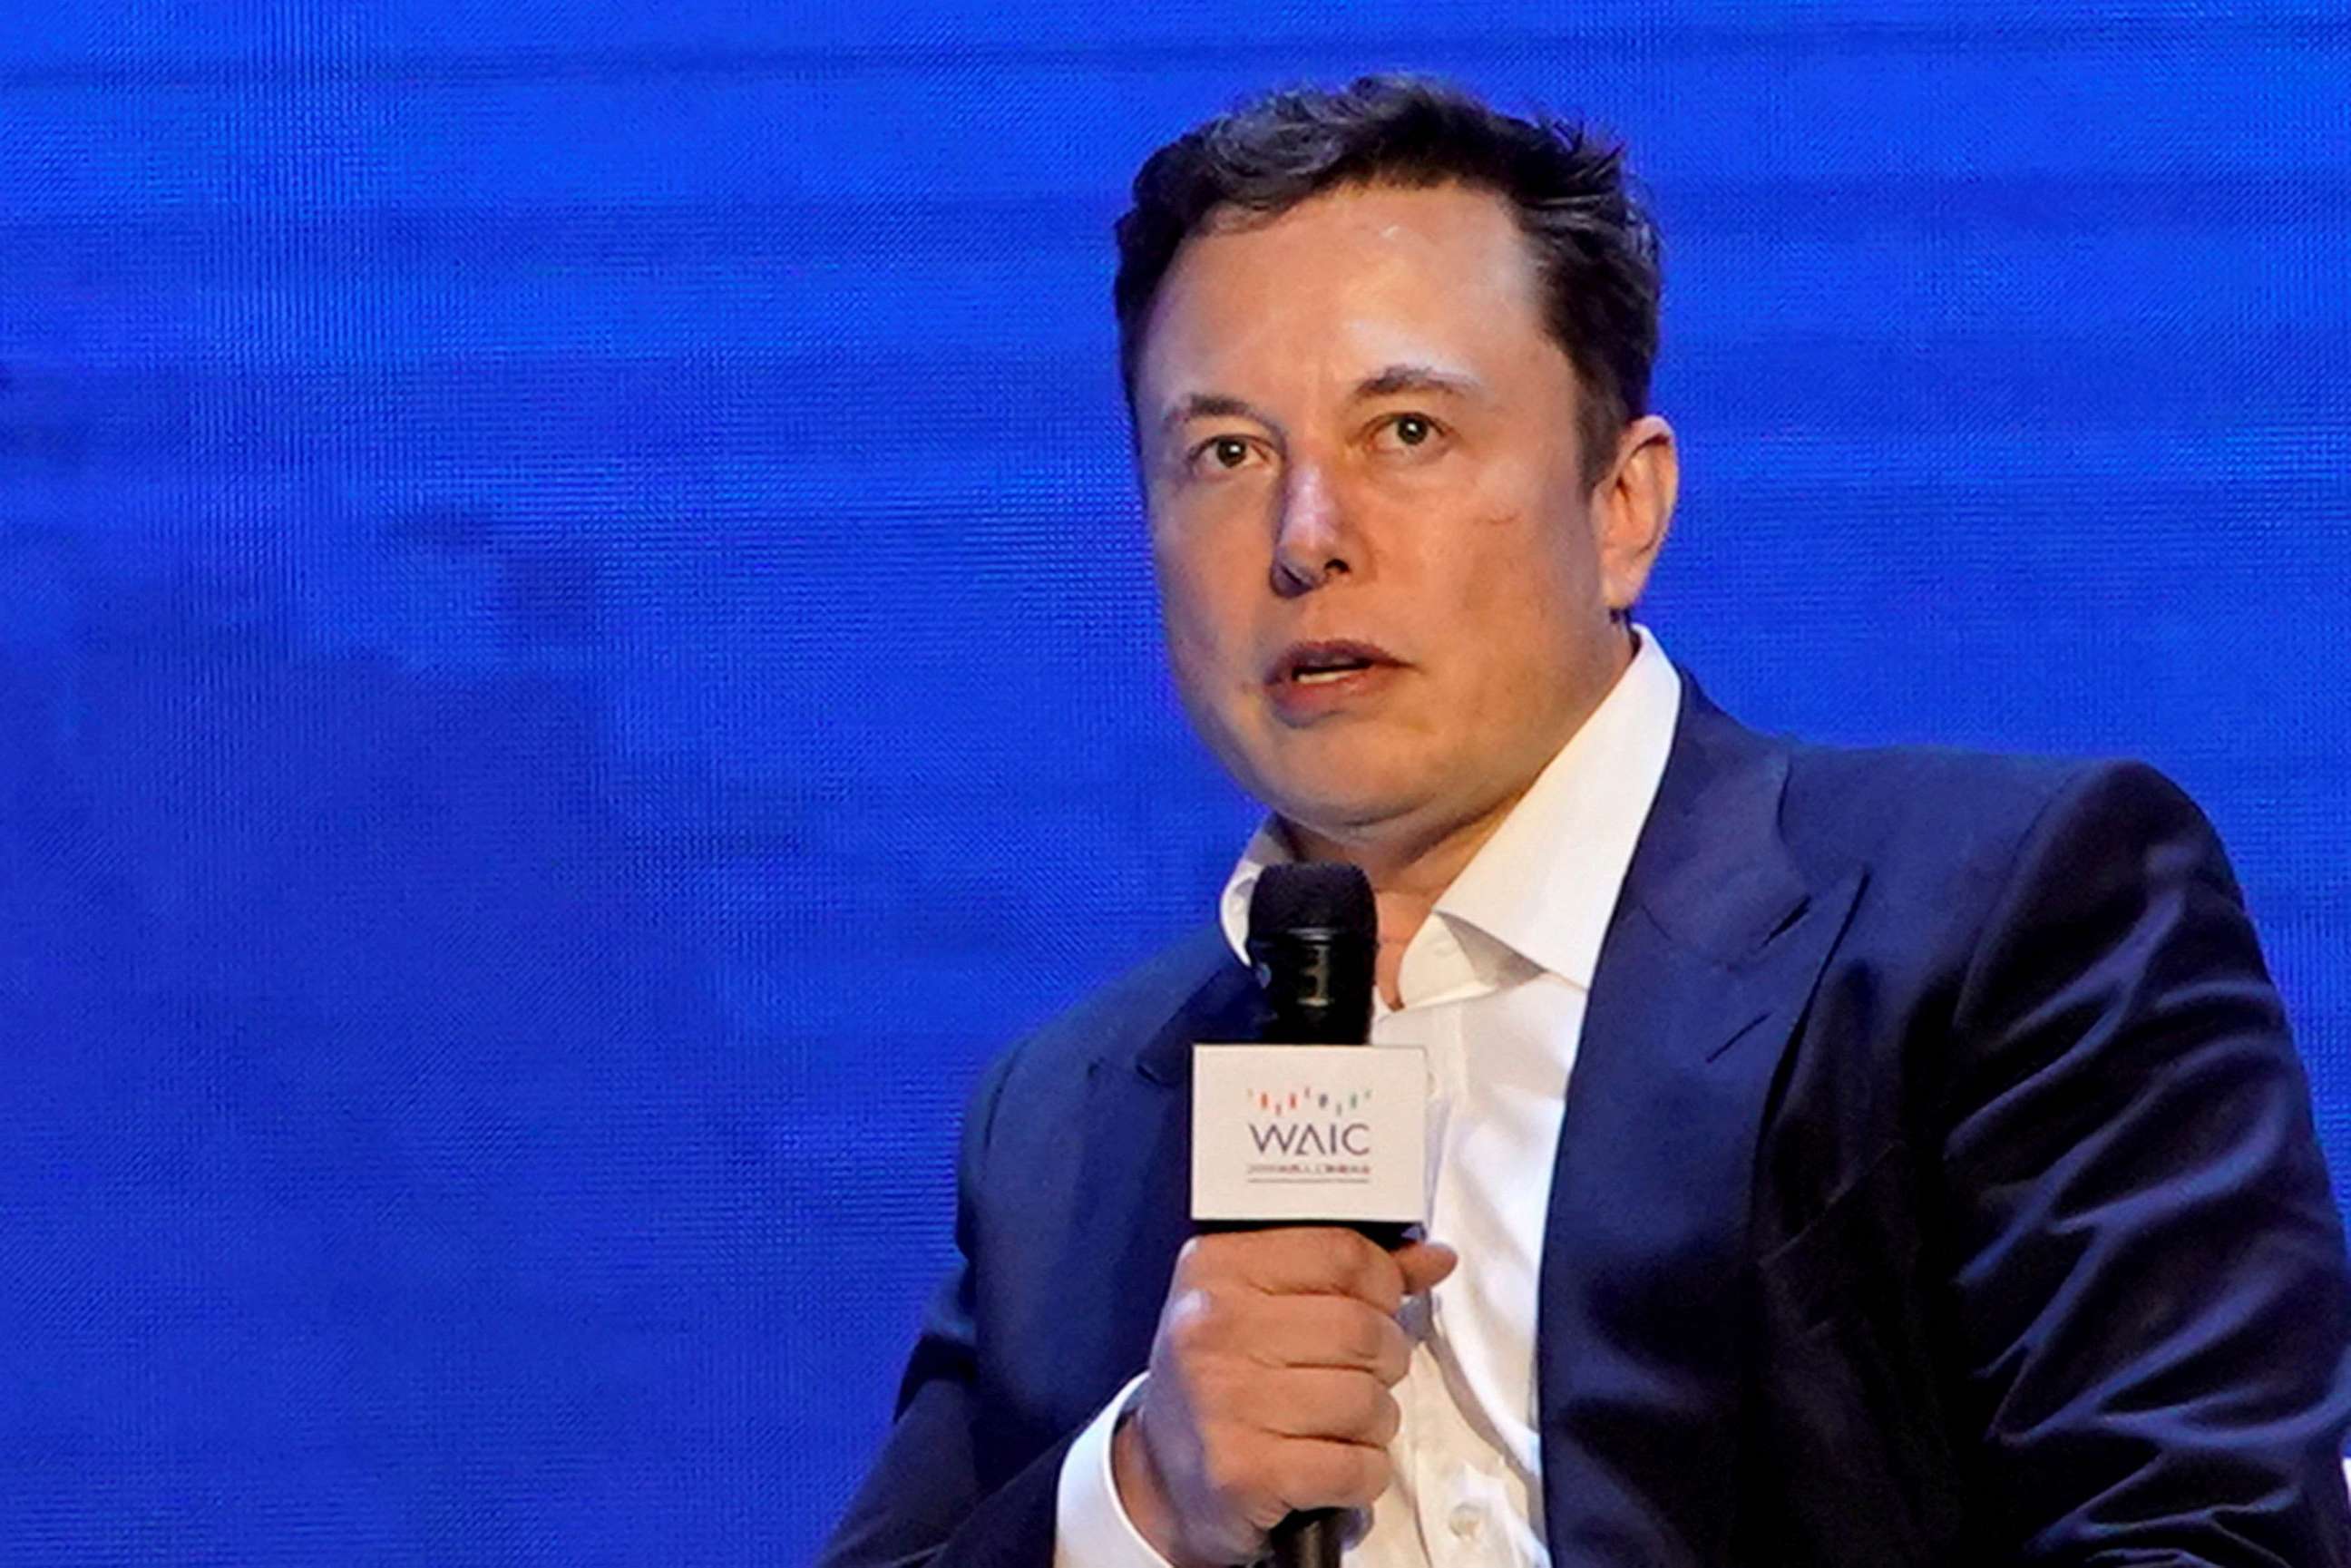 PHOTO: Tesla Inc CEO Elon Musk attends the World Artificial Intelligence Conference (WAIC) in Shanghai, China August 29, 2019.